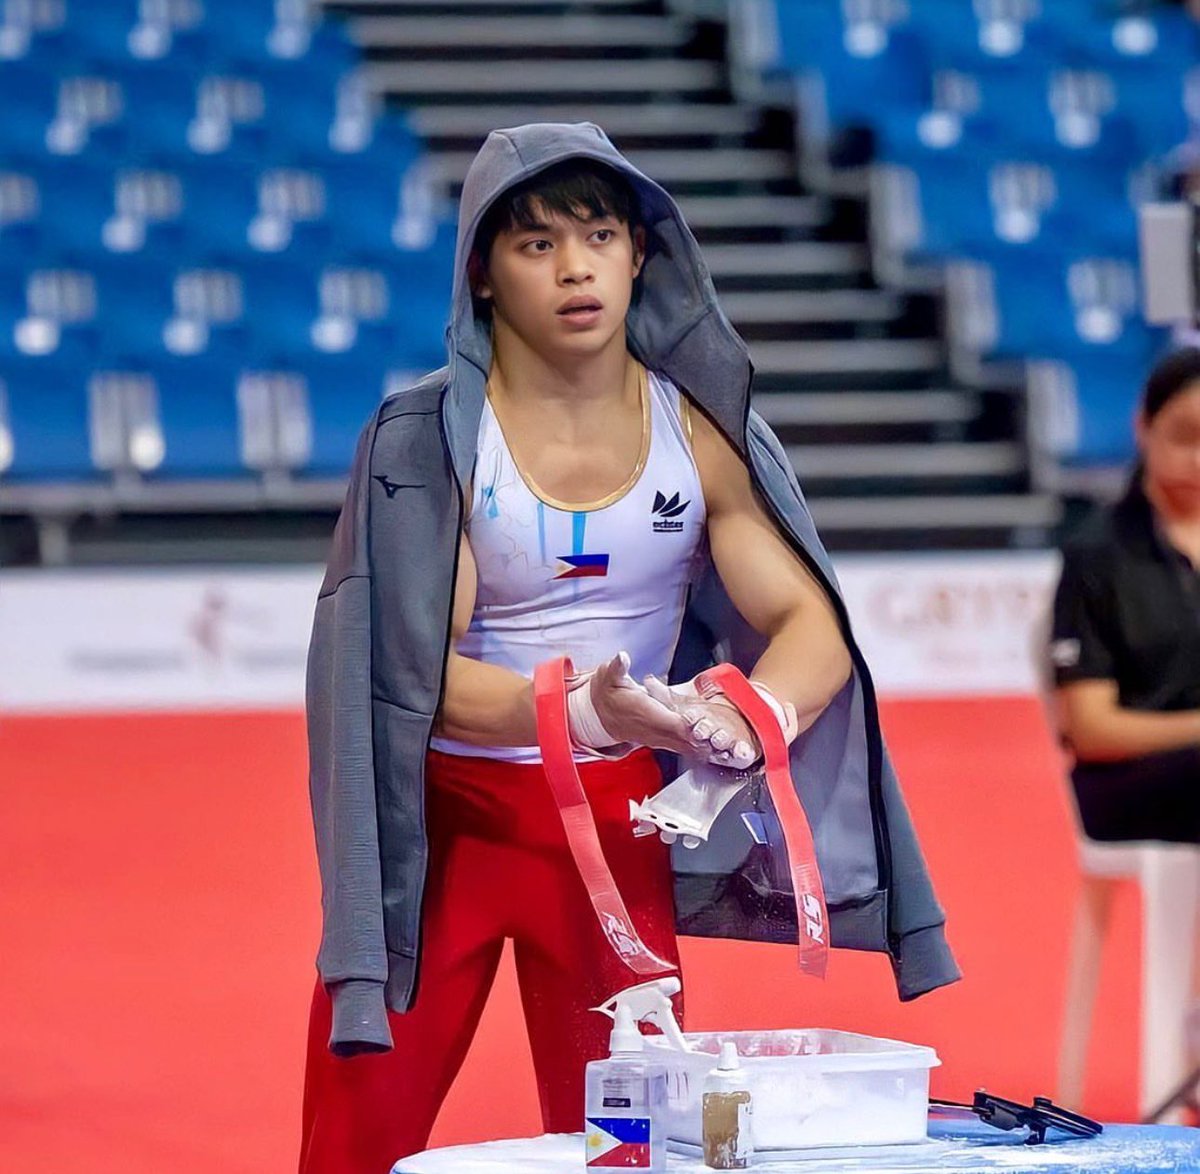 MAKE IT TWO 🙌 Filipino Gymnast Carlos Yulo qualifies in Men’s Parallel Bars and Men’s Vault Finals after finishing second at both events at the 2024 FIG Artistic Gymnastics World Cup Series in Doha, Qatar. Follow #GMASports for more updates. 📸: Carlos Yulo / Instagram